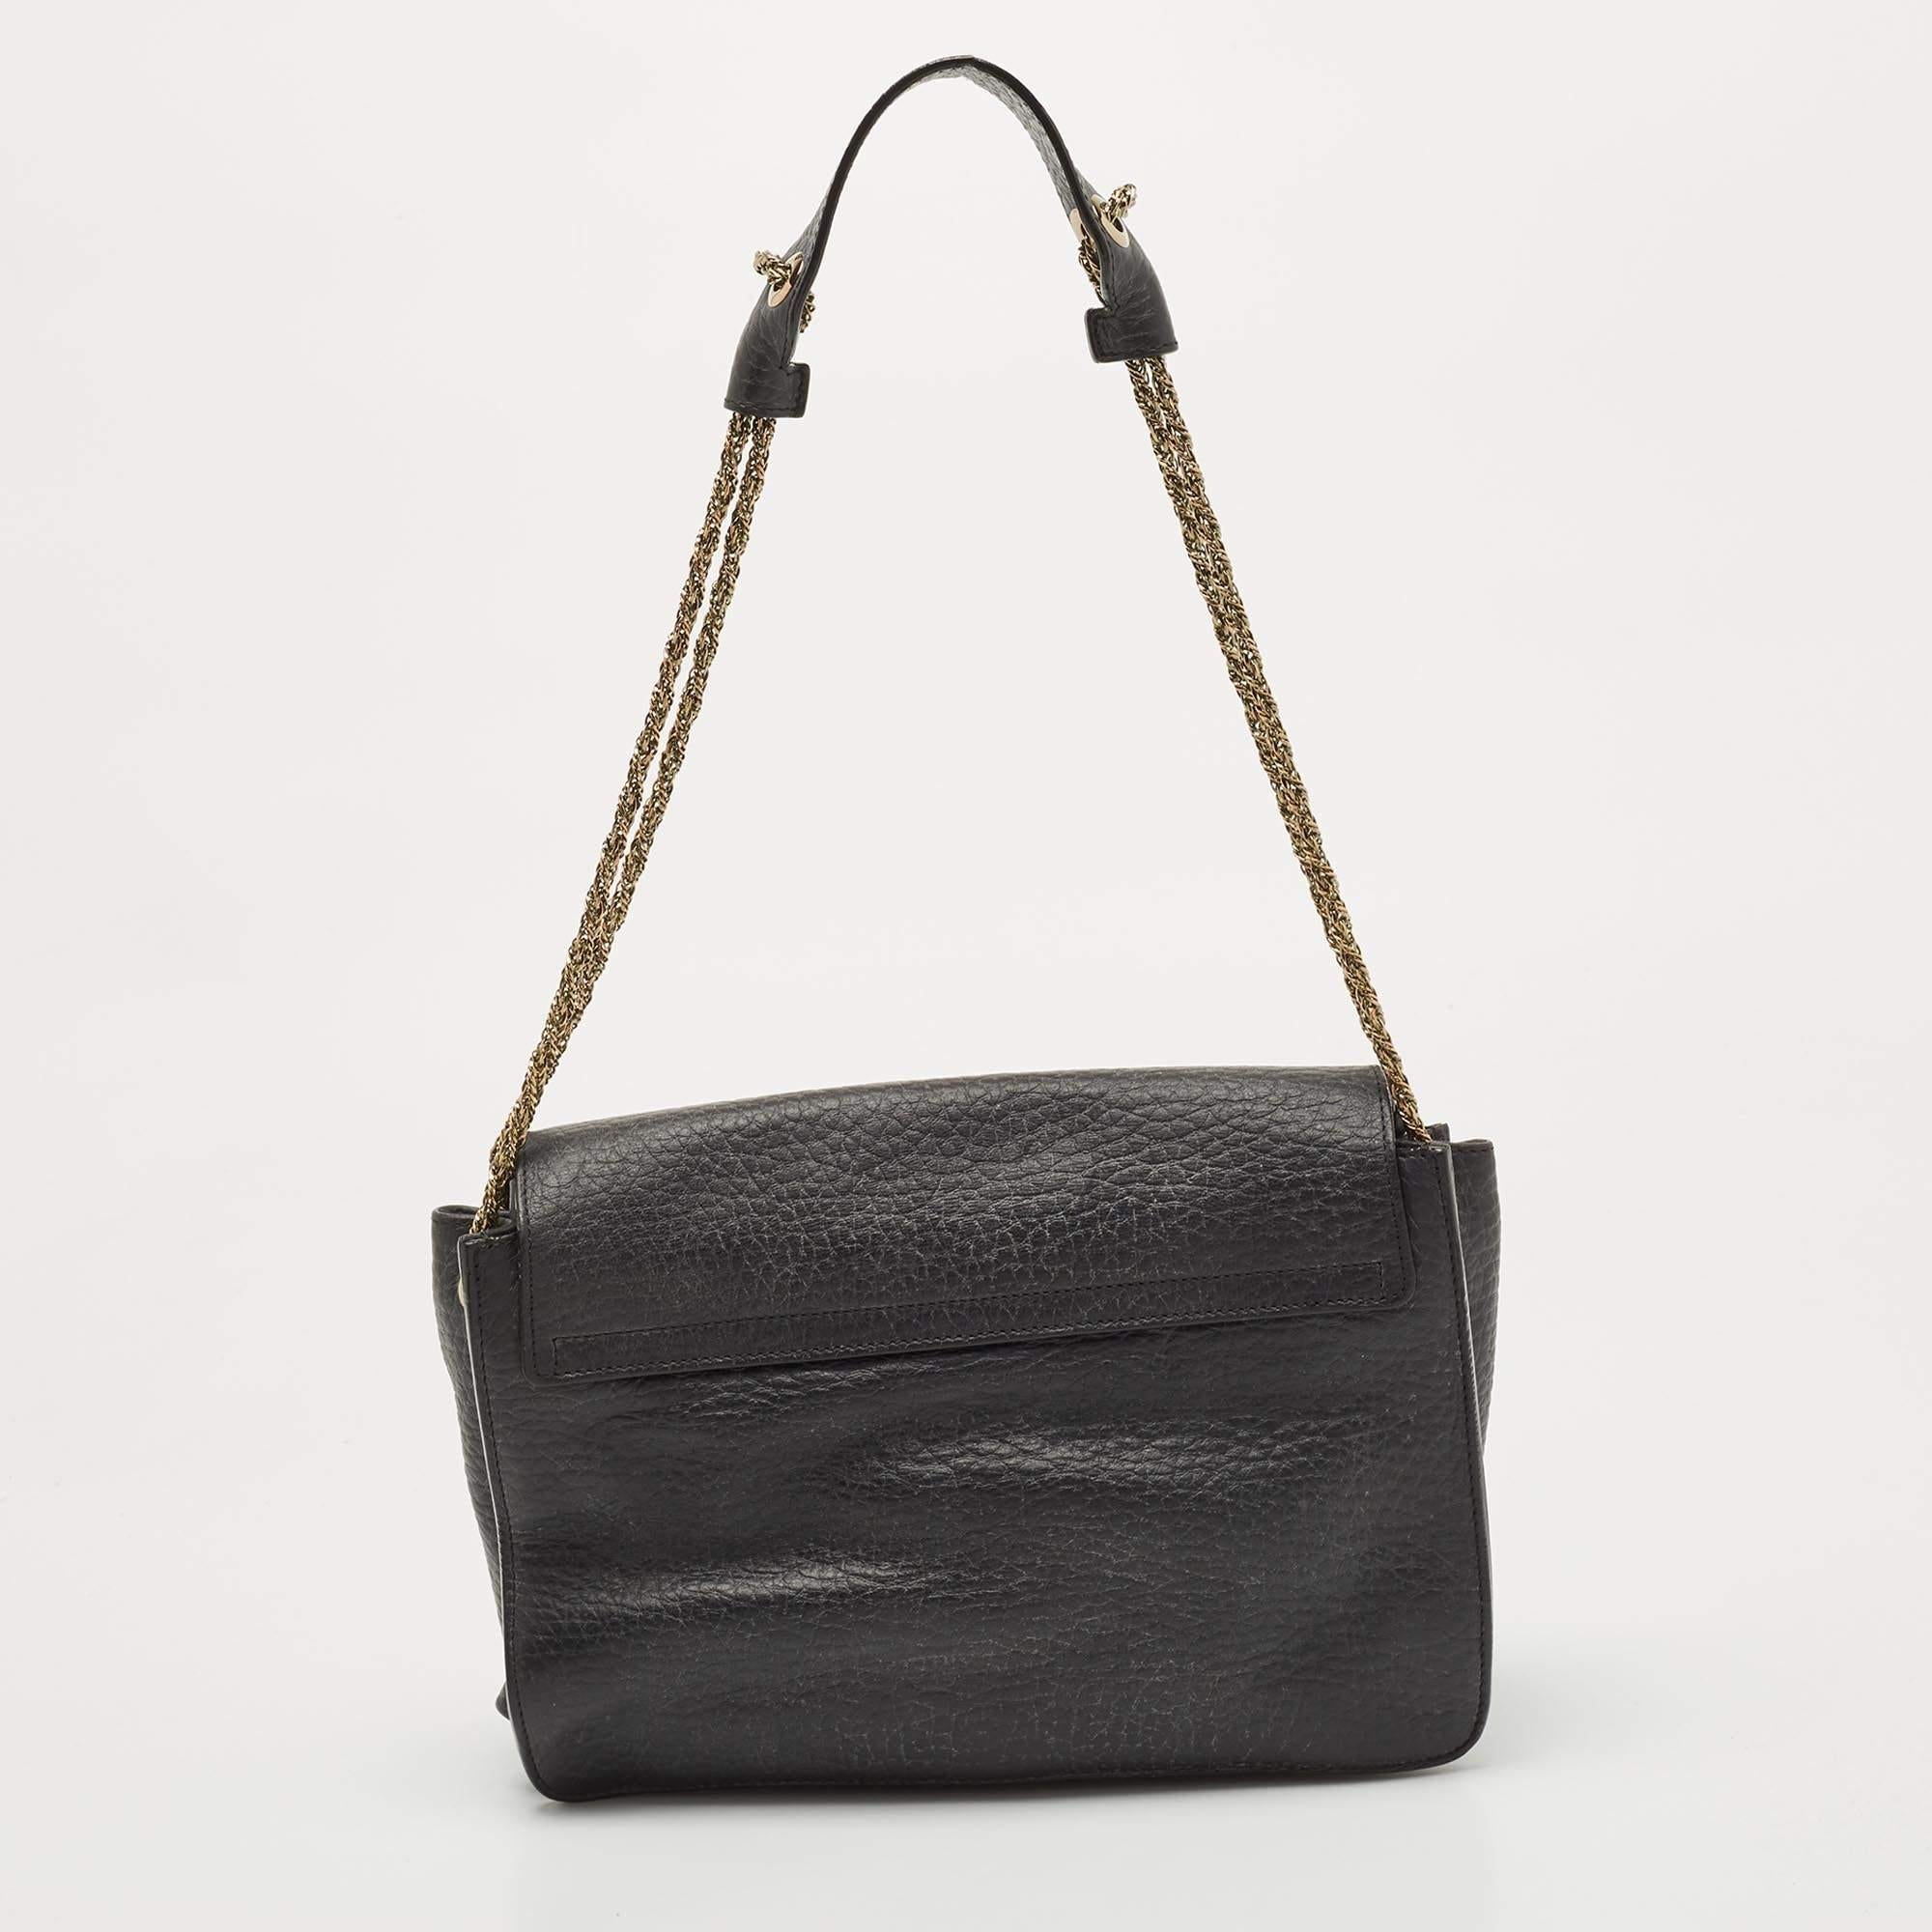 For a look that is complete with style, taste, and a touch of luxe, this designer bag is the perfect addition. Flaunt this beauty on your shoulder and revel in the taste of luxury it leaves you with.

Includes Original Dustbag, Authenticity Card,